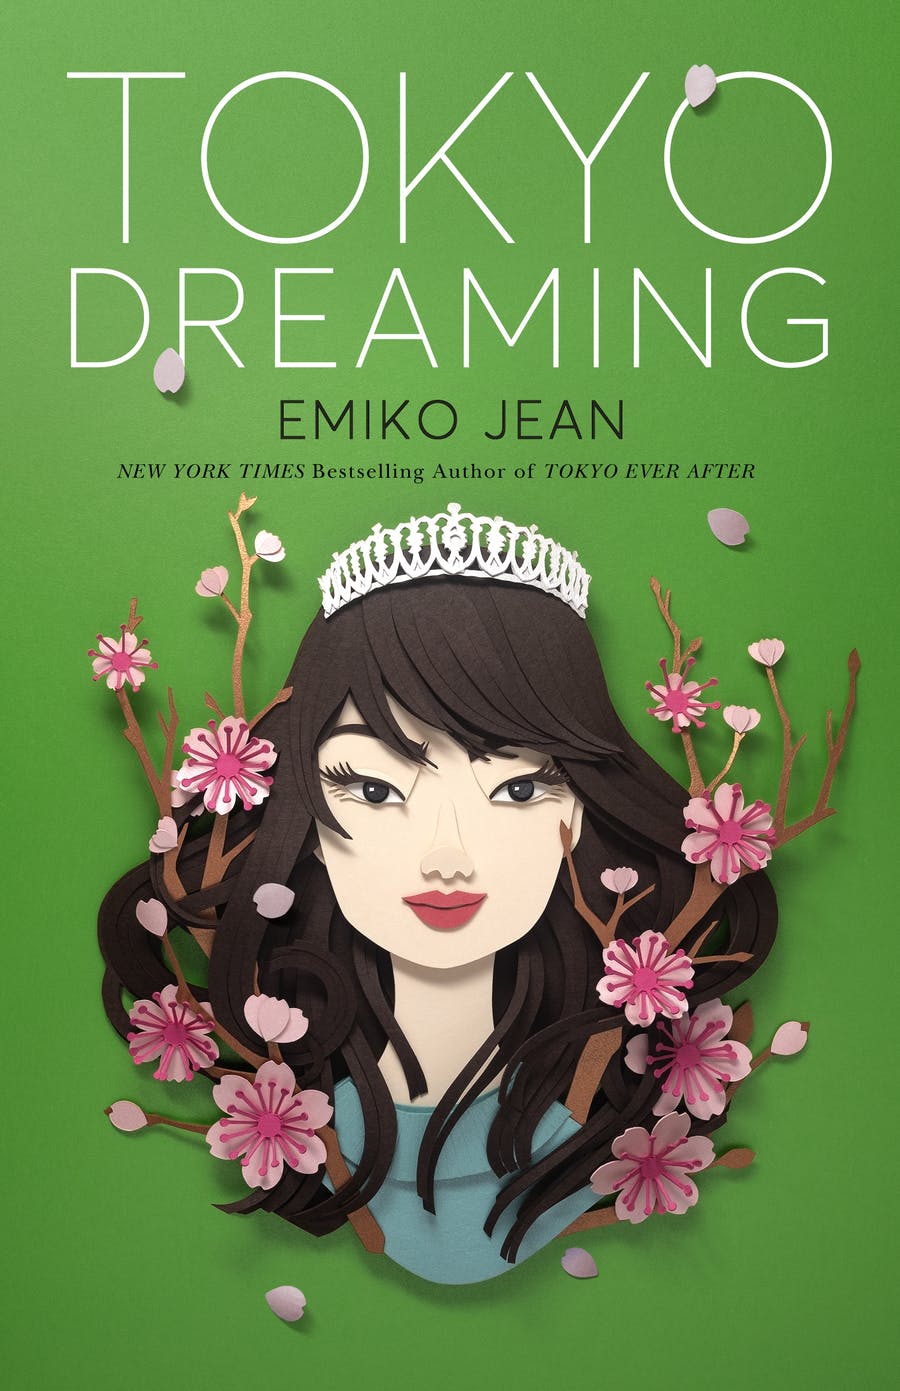 Tokyo Dreaming by Emiko Jean | Book Review